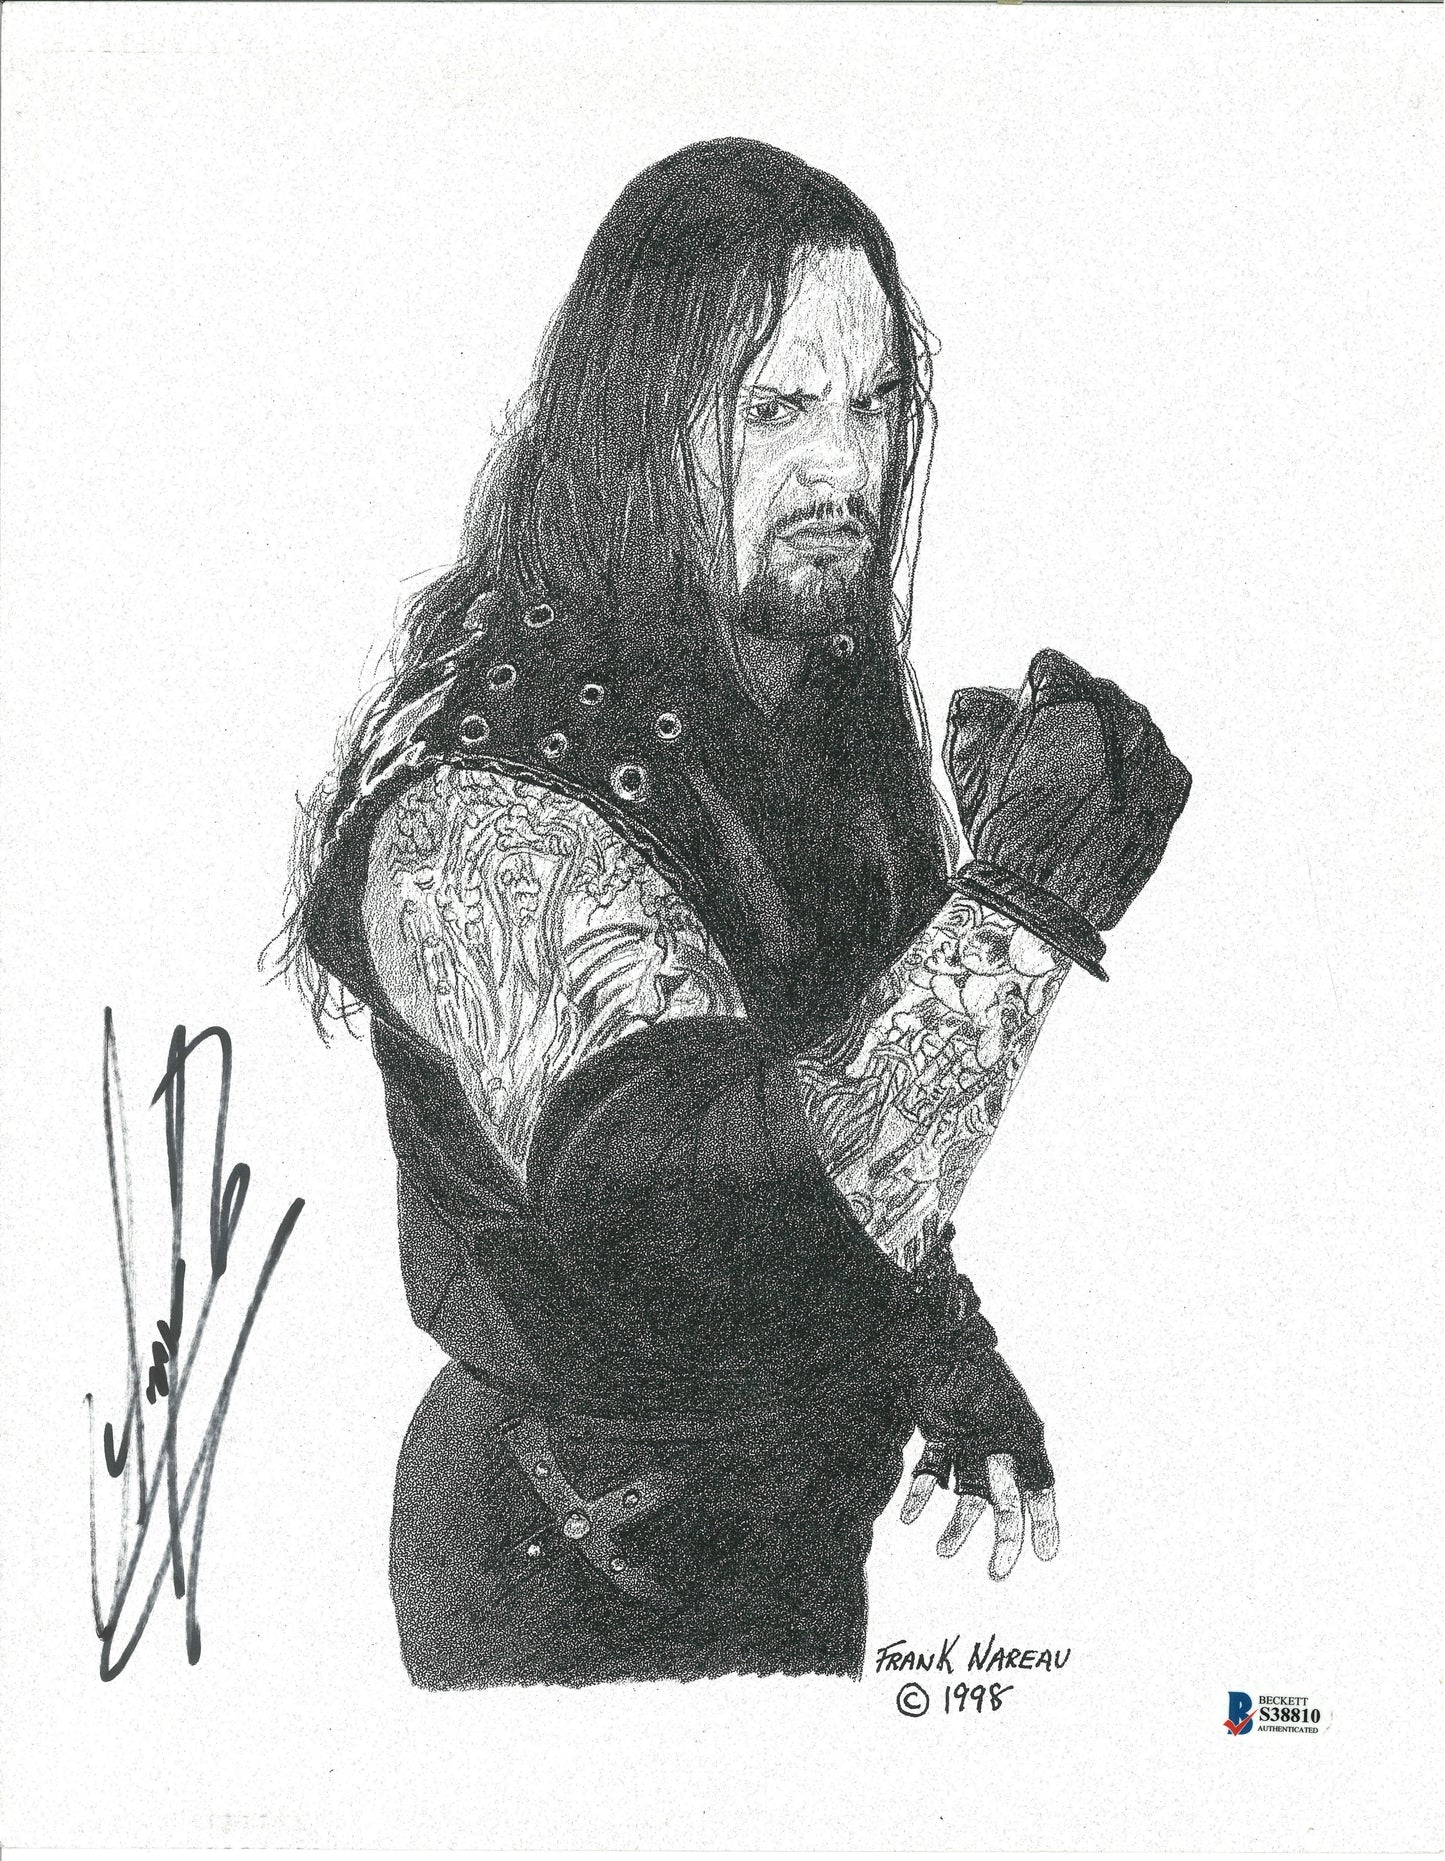 WWE- Autographed- The Undertaker Signed Frank Nareau 11x14 Inch Artwork Print Beckett Certified Authentic 102